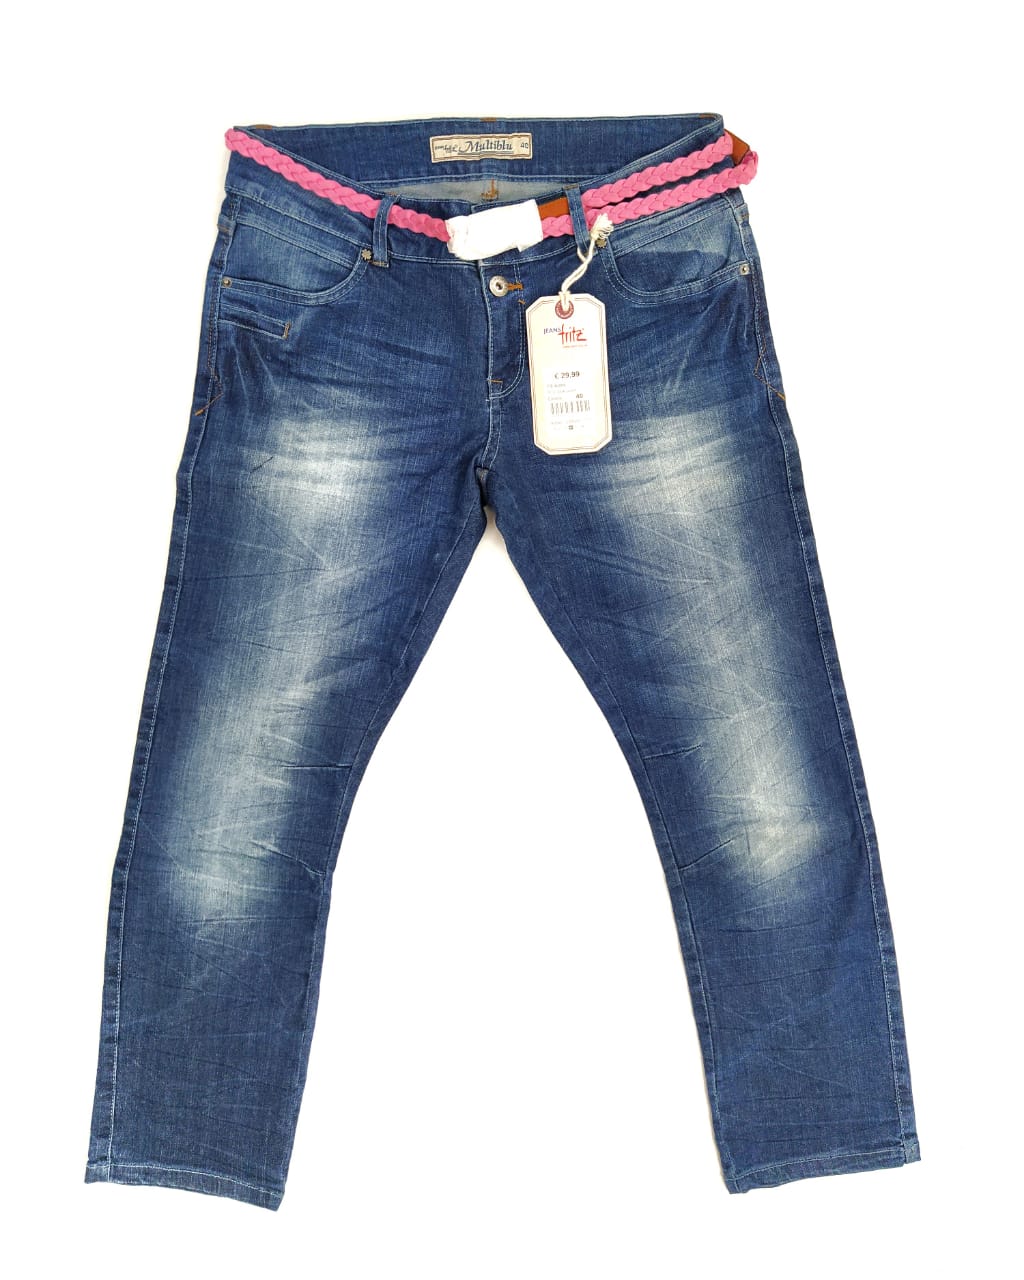 Multiblu Slim Fit 2 Button Jeans as